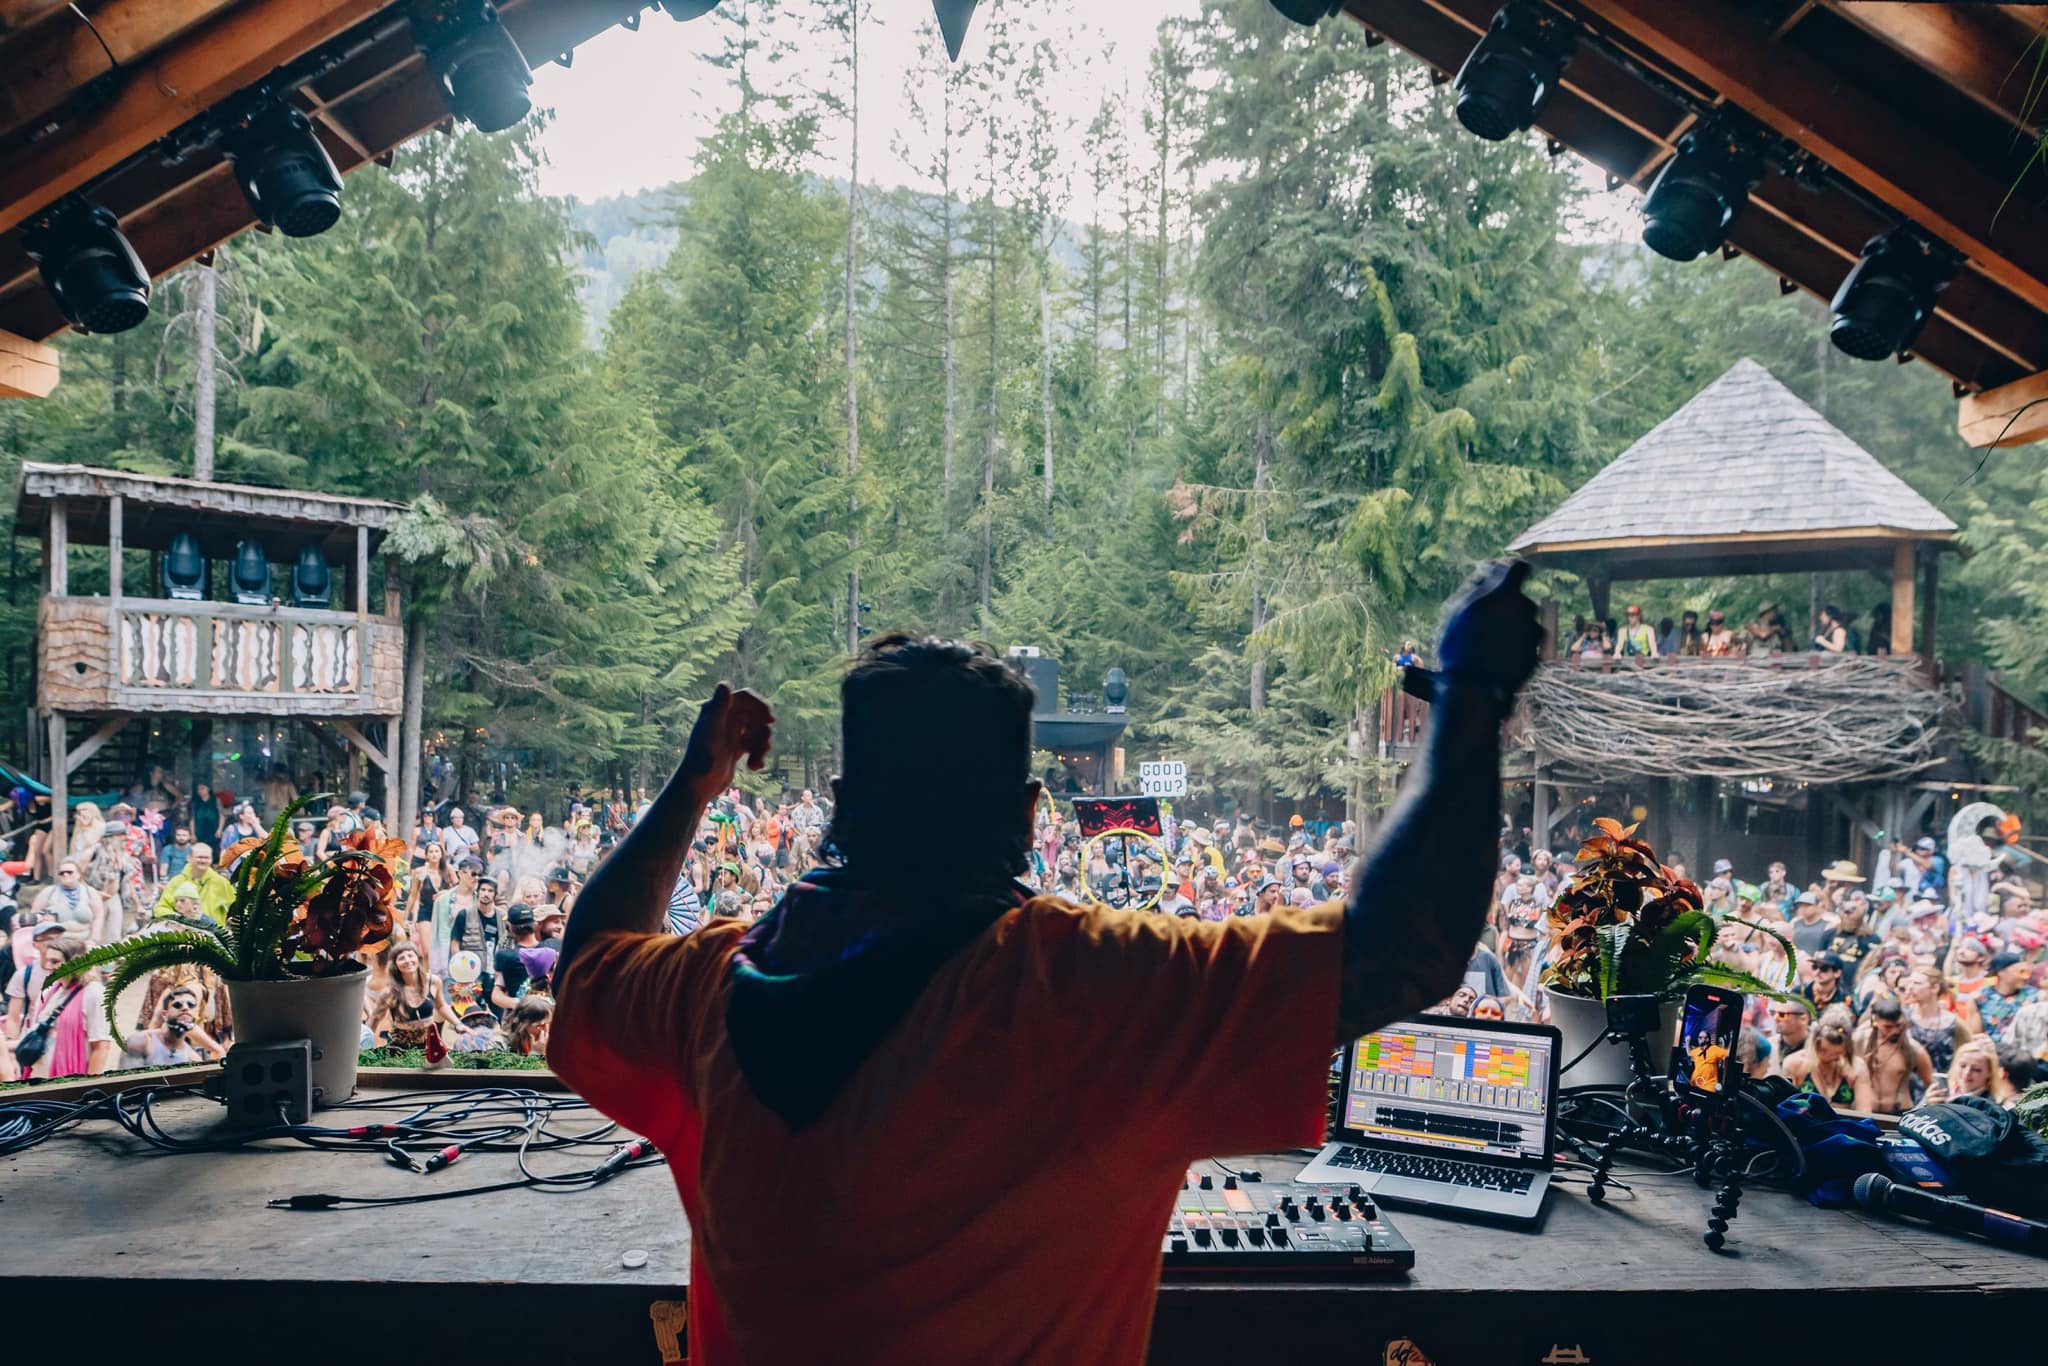 Celebrating National Indigenous History Month with a photo of Handsome Tiger DJs at The Grove at Shambhala Music Festival in 2022.